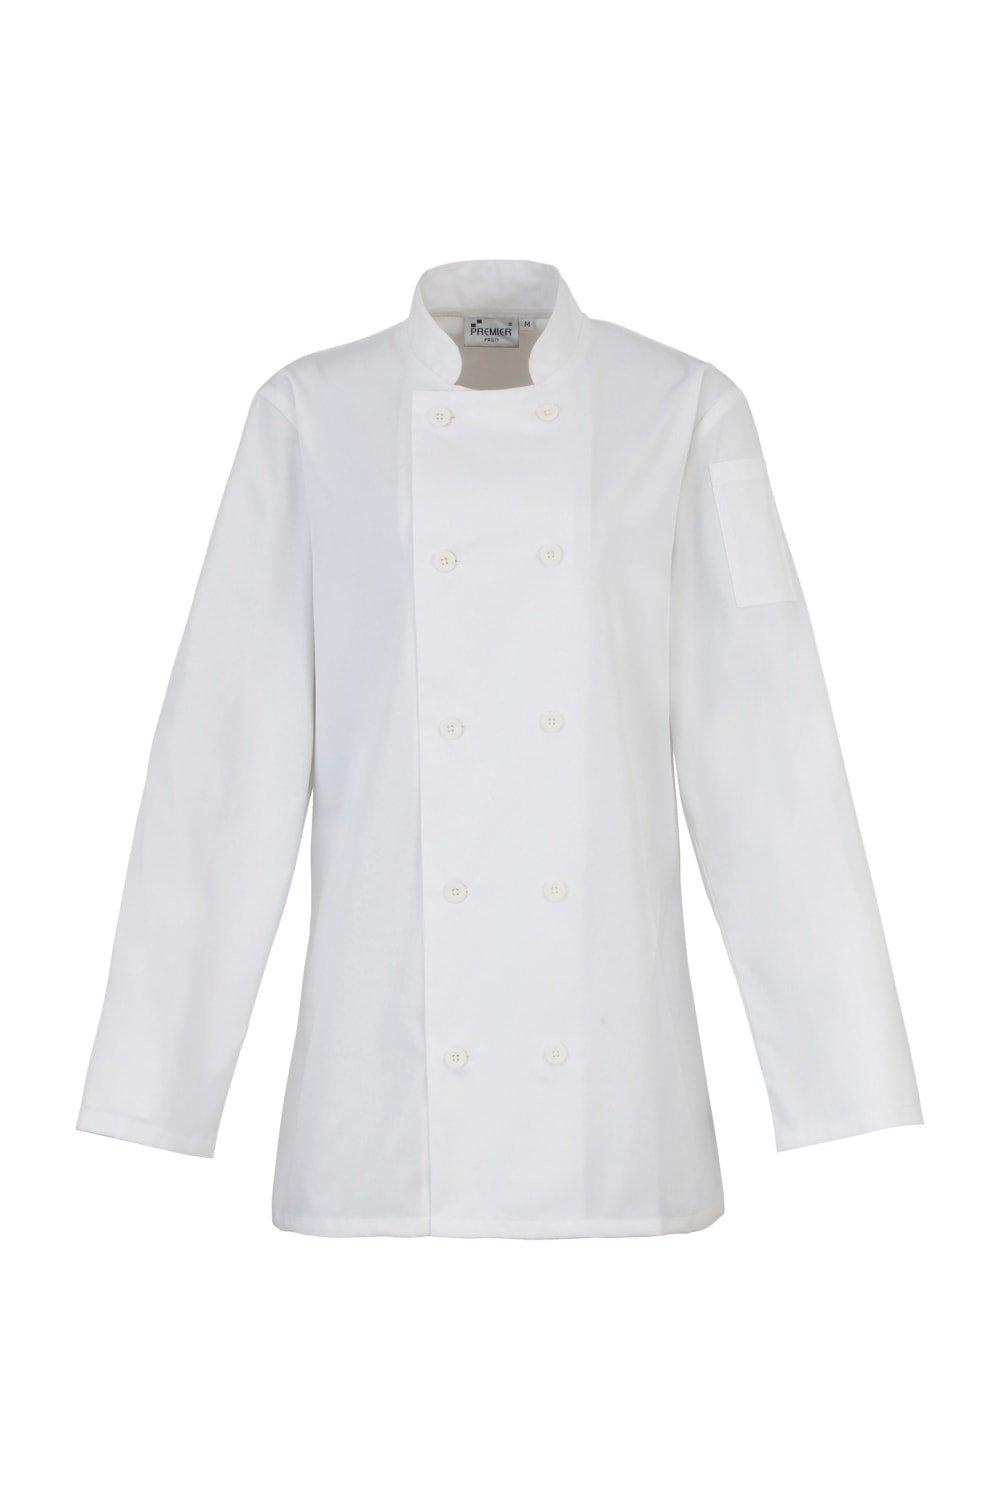 Long Sleeve Chefs Jacket Chefswear Pack of 2